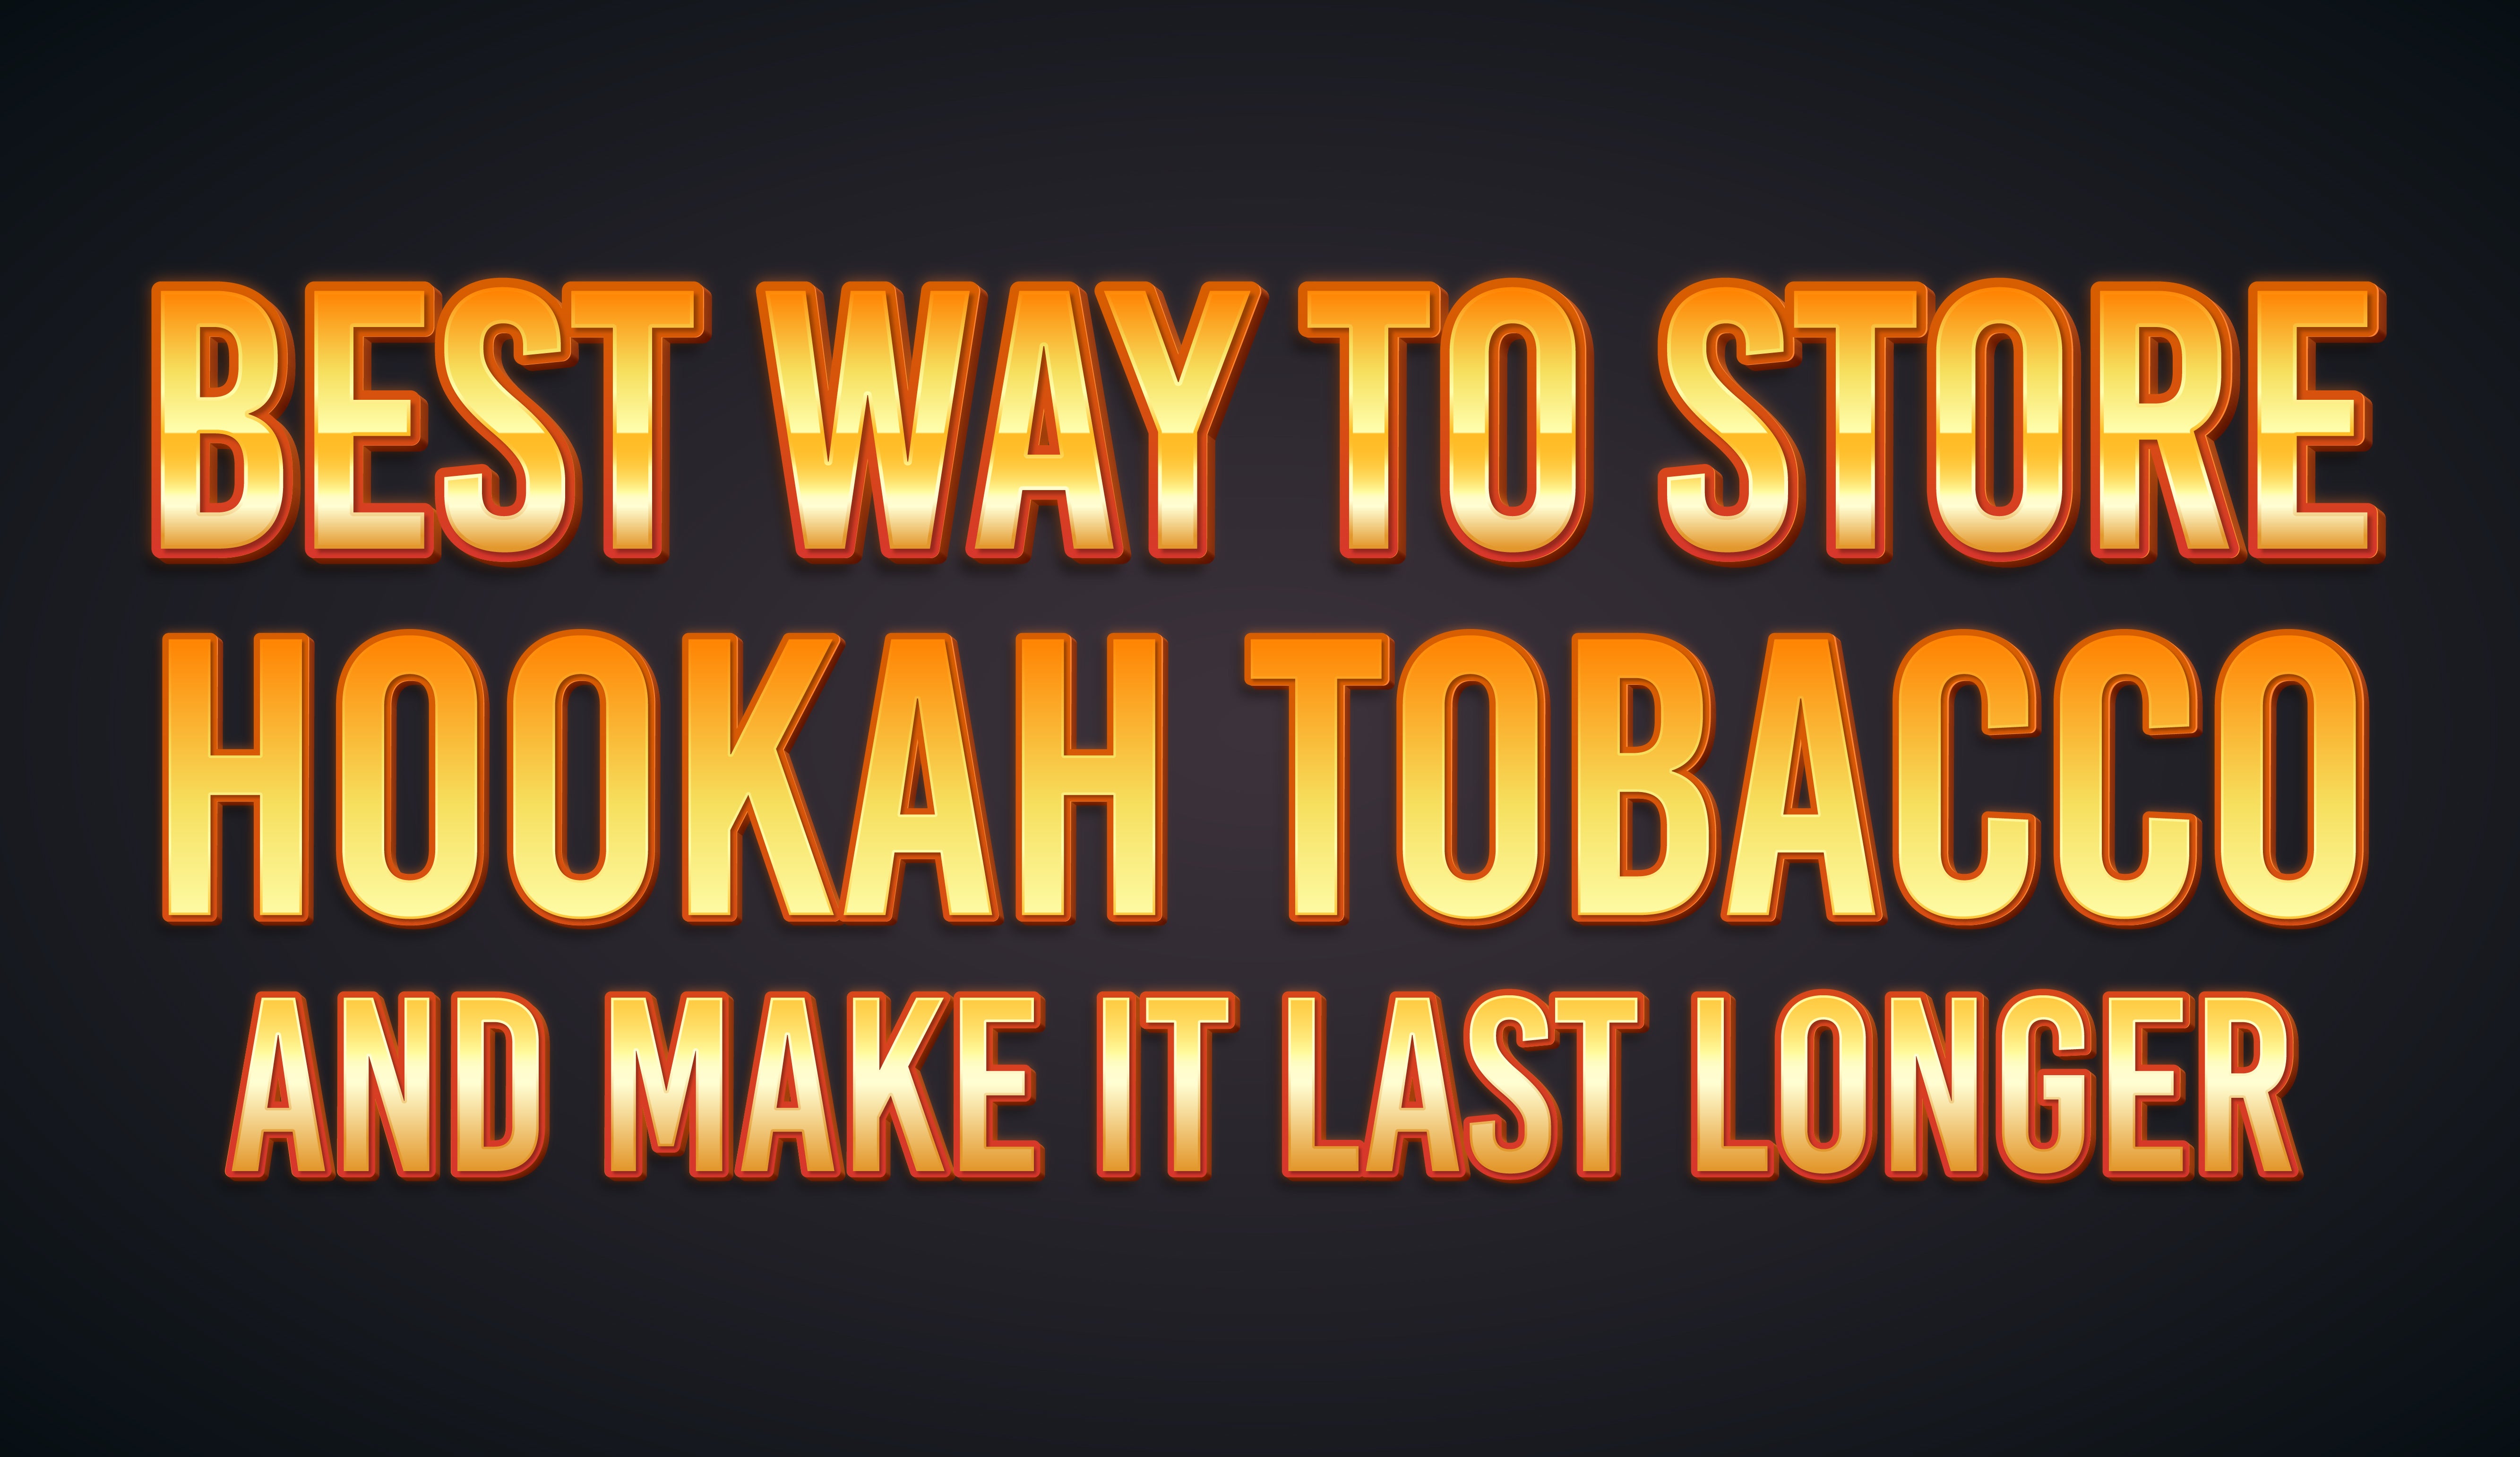 Best Way To Store Hookah Tobacco and Make It Last Longer